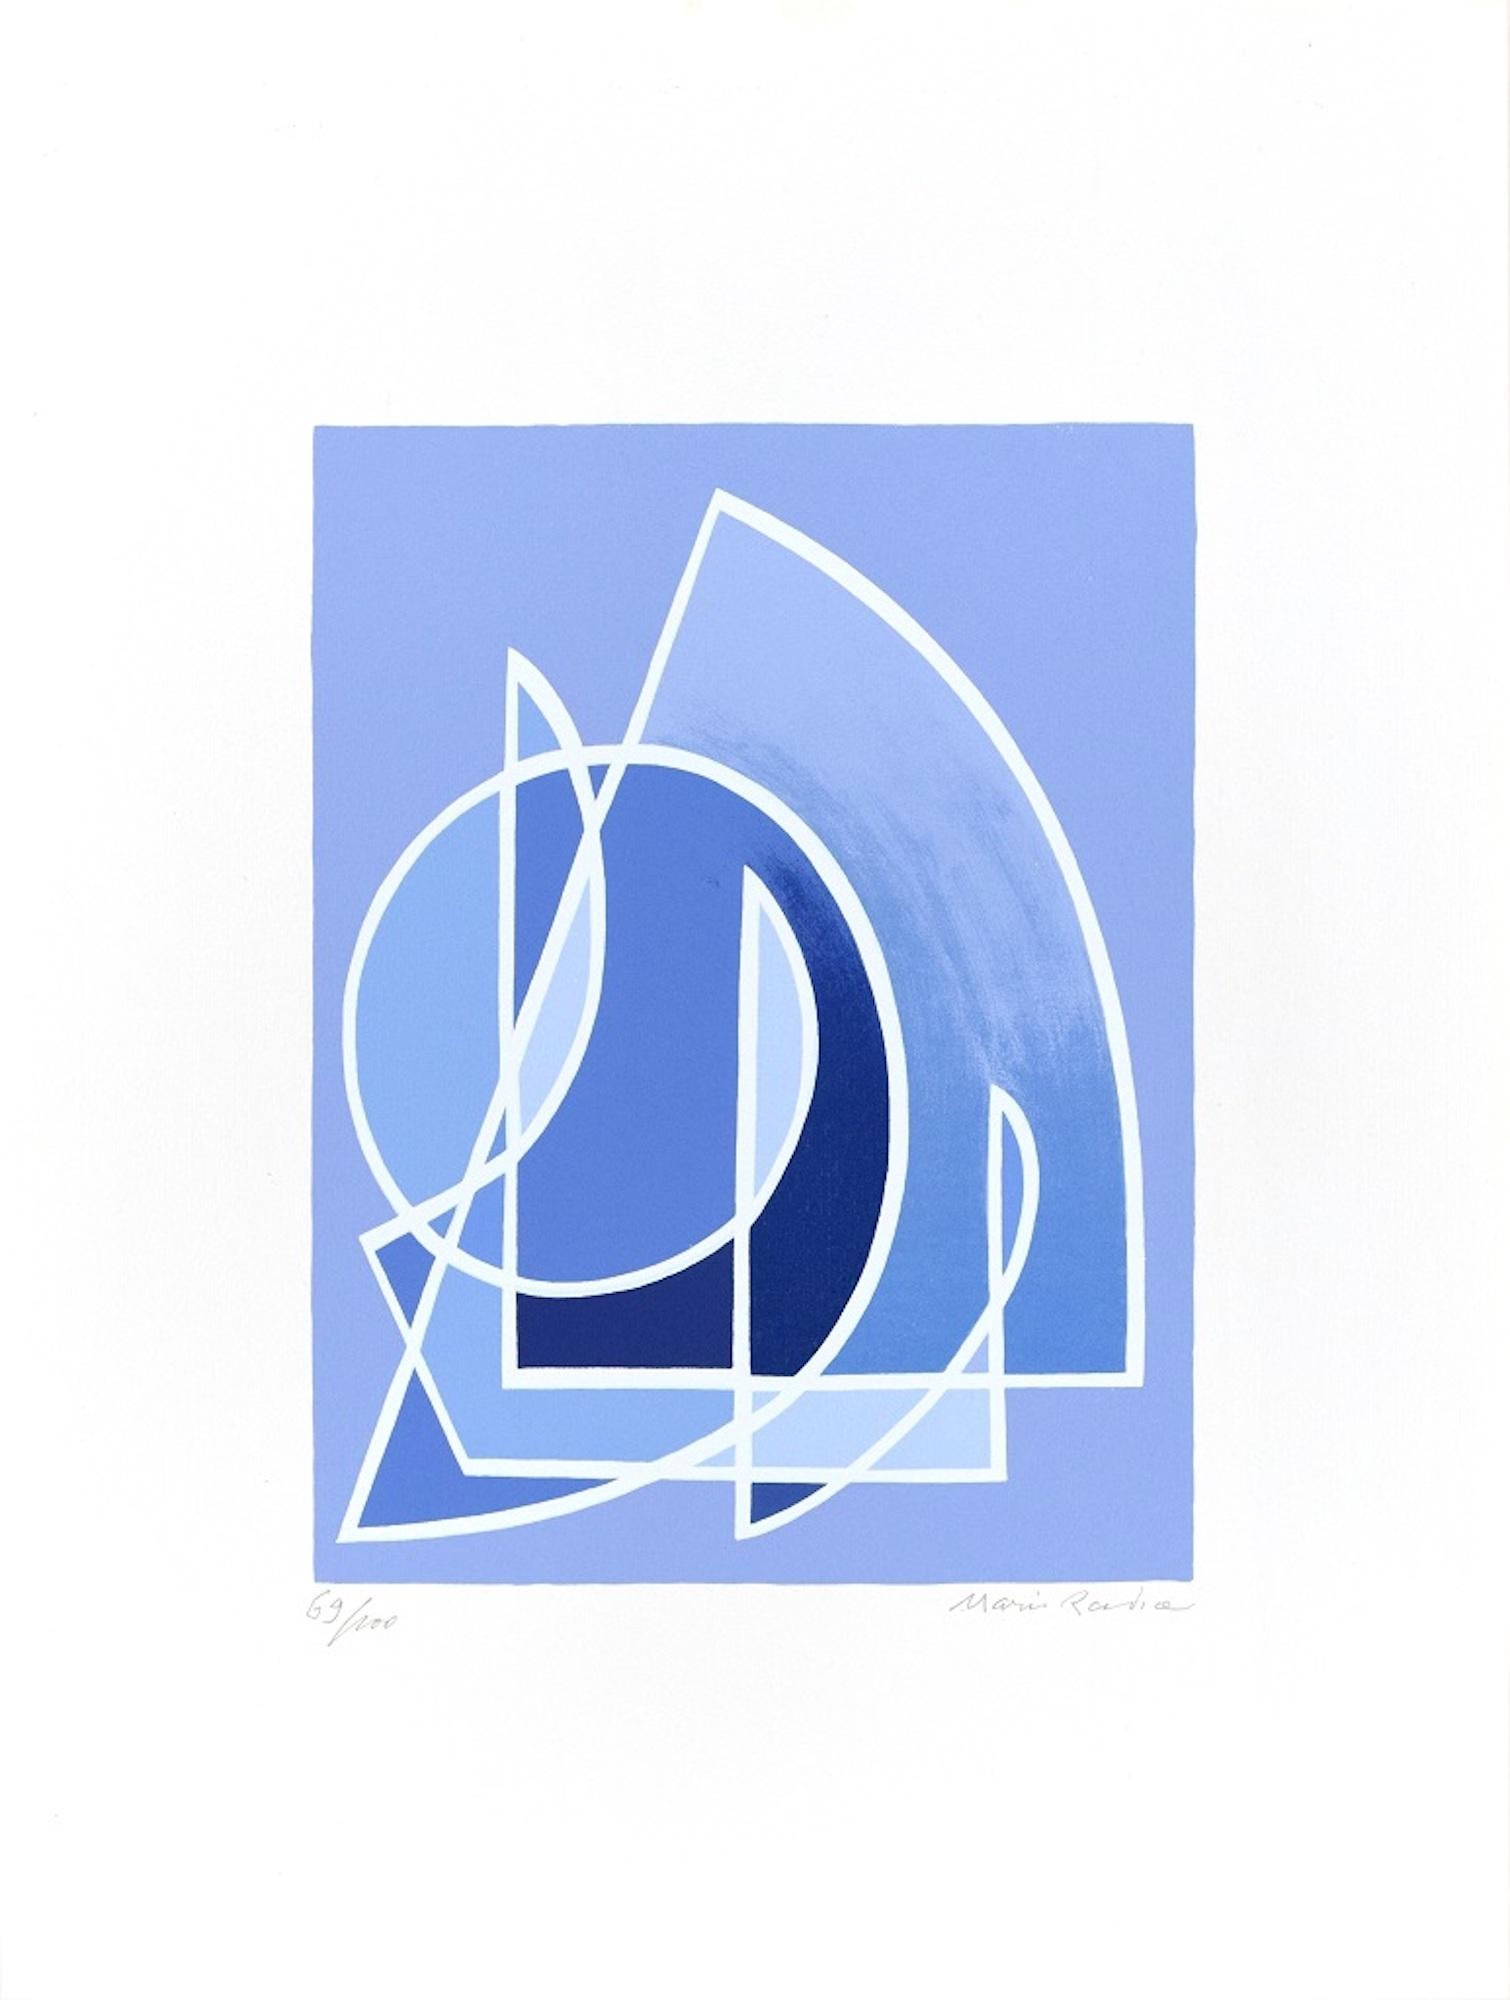 Image dimensions: 25.3 x 19.3 cm.

La Morte degli amanti is a wonderful colored serigraph on paper, realized by the Italian artist, Mario Radice and published in 1964 by La Nuova Foglio. hand-signed and Numbered in pencil on lower margin. Edition of